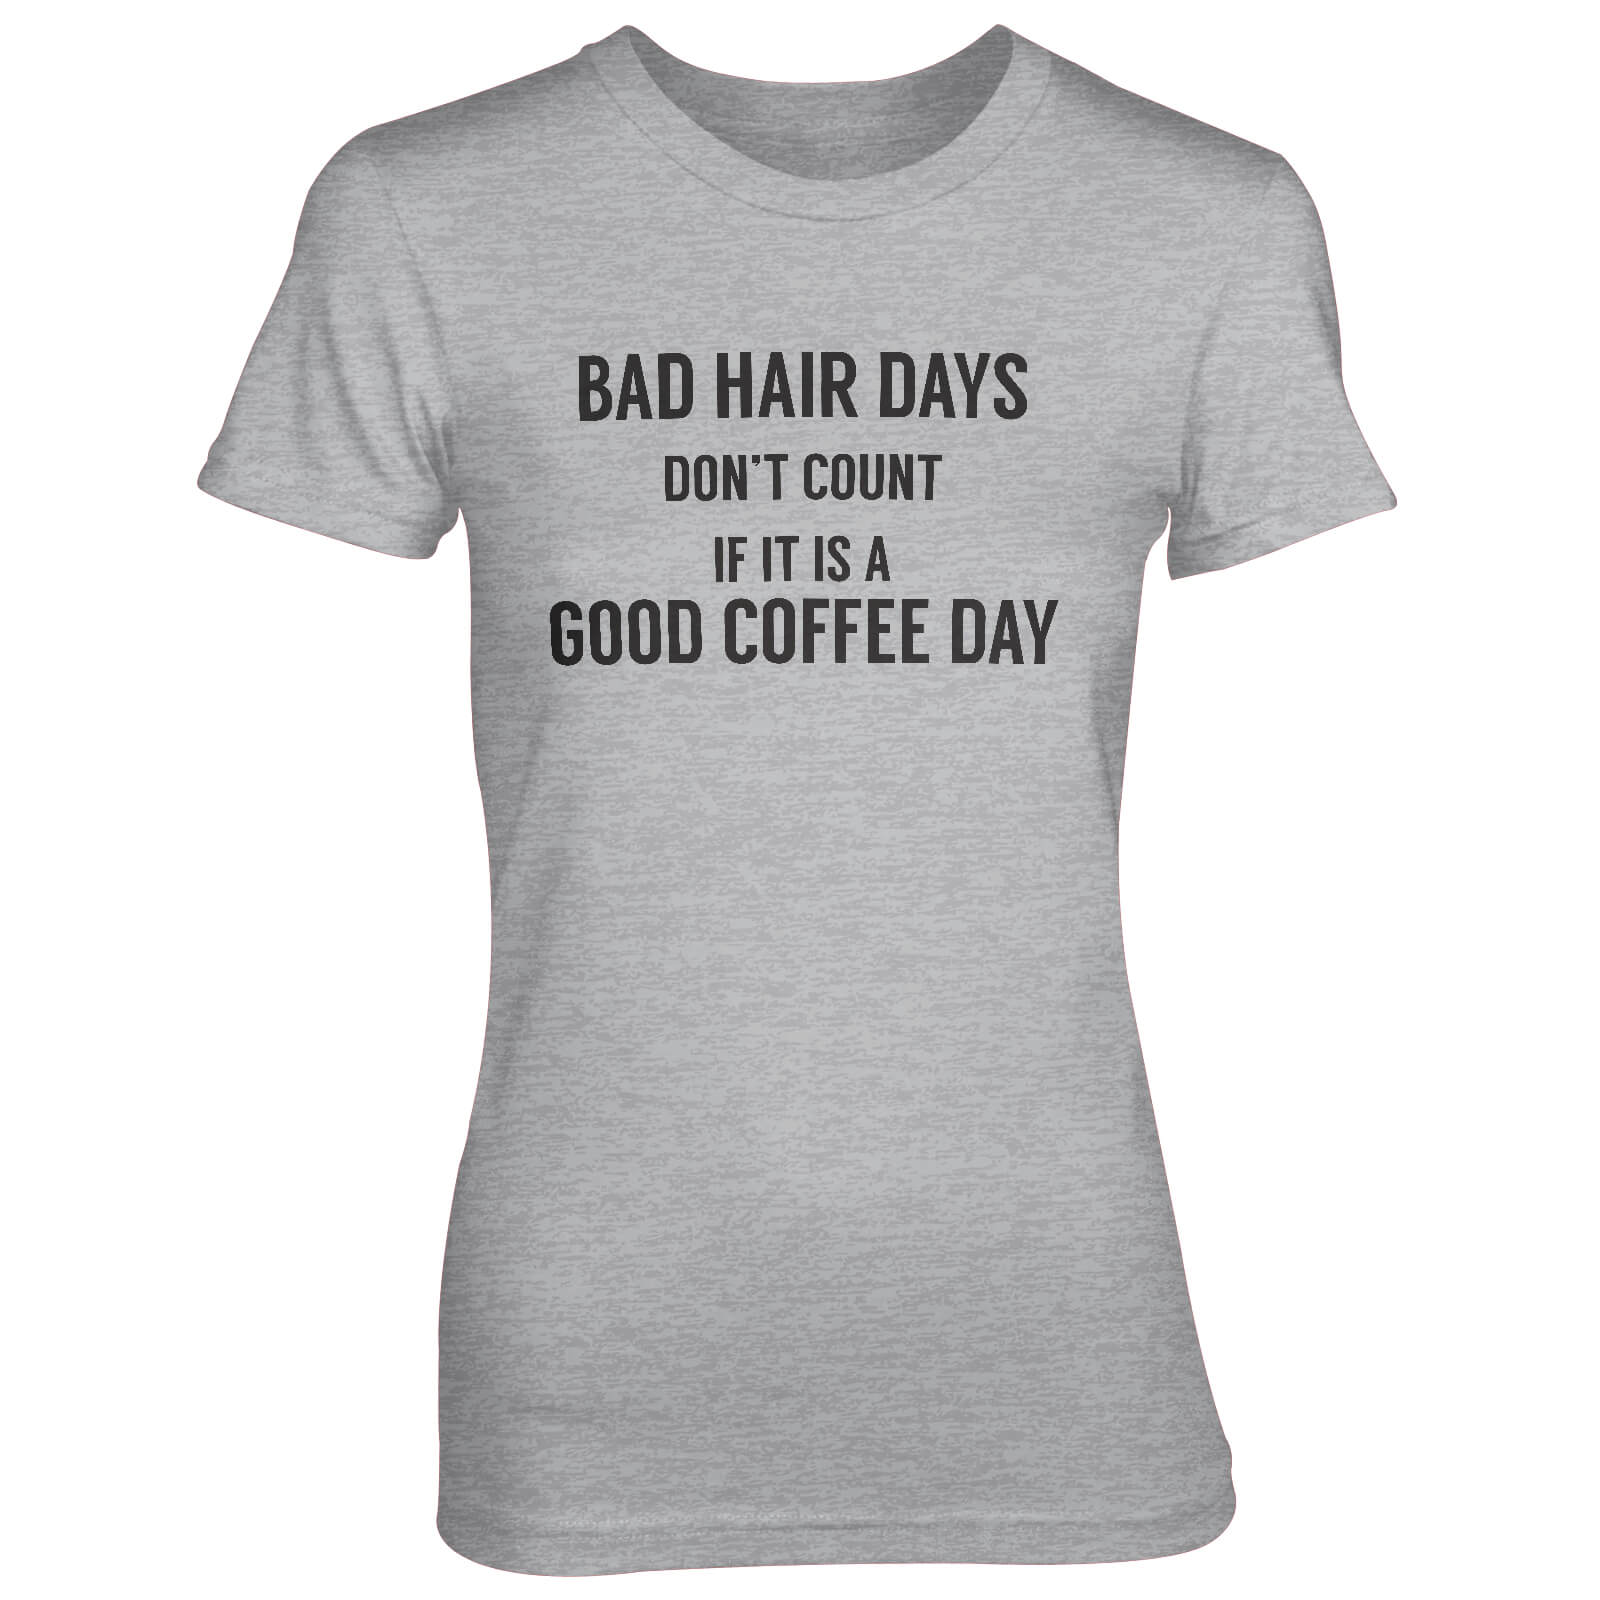 Bad Hair Days Don't Count If It's A Good Coffee Day Women's Grey T-Shirt - S - Grey